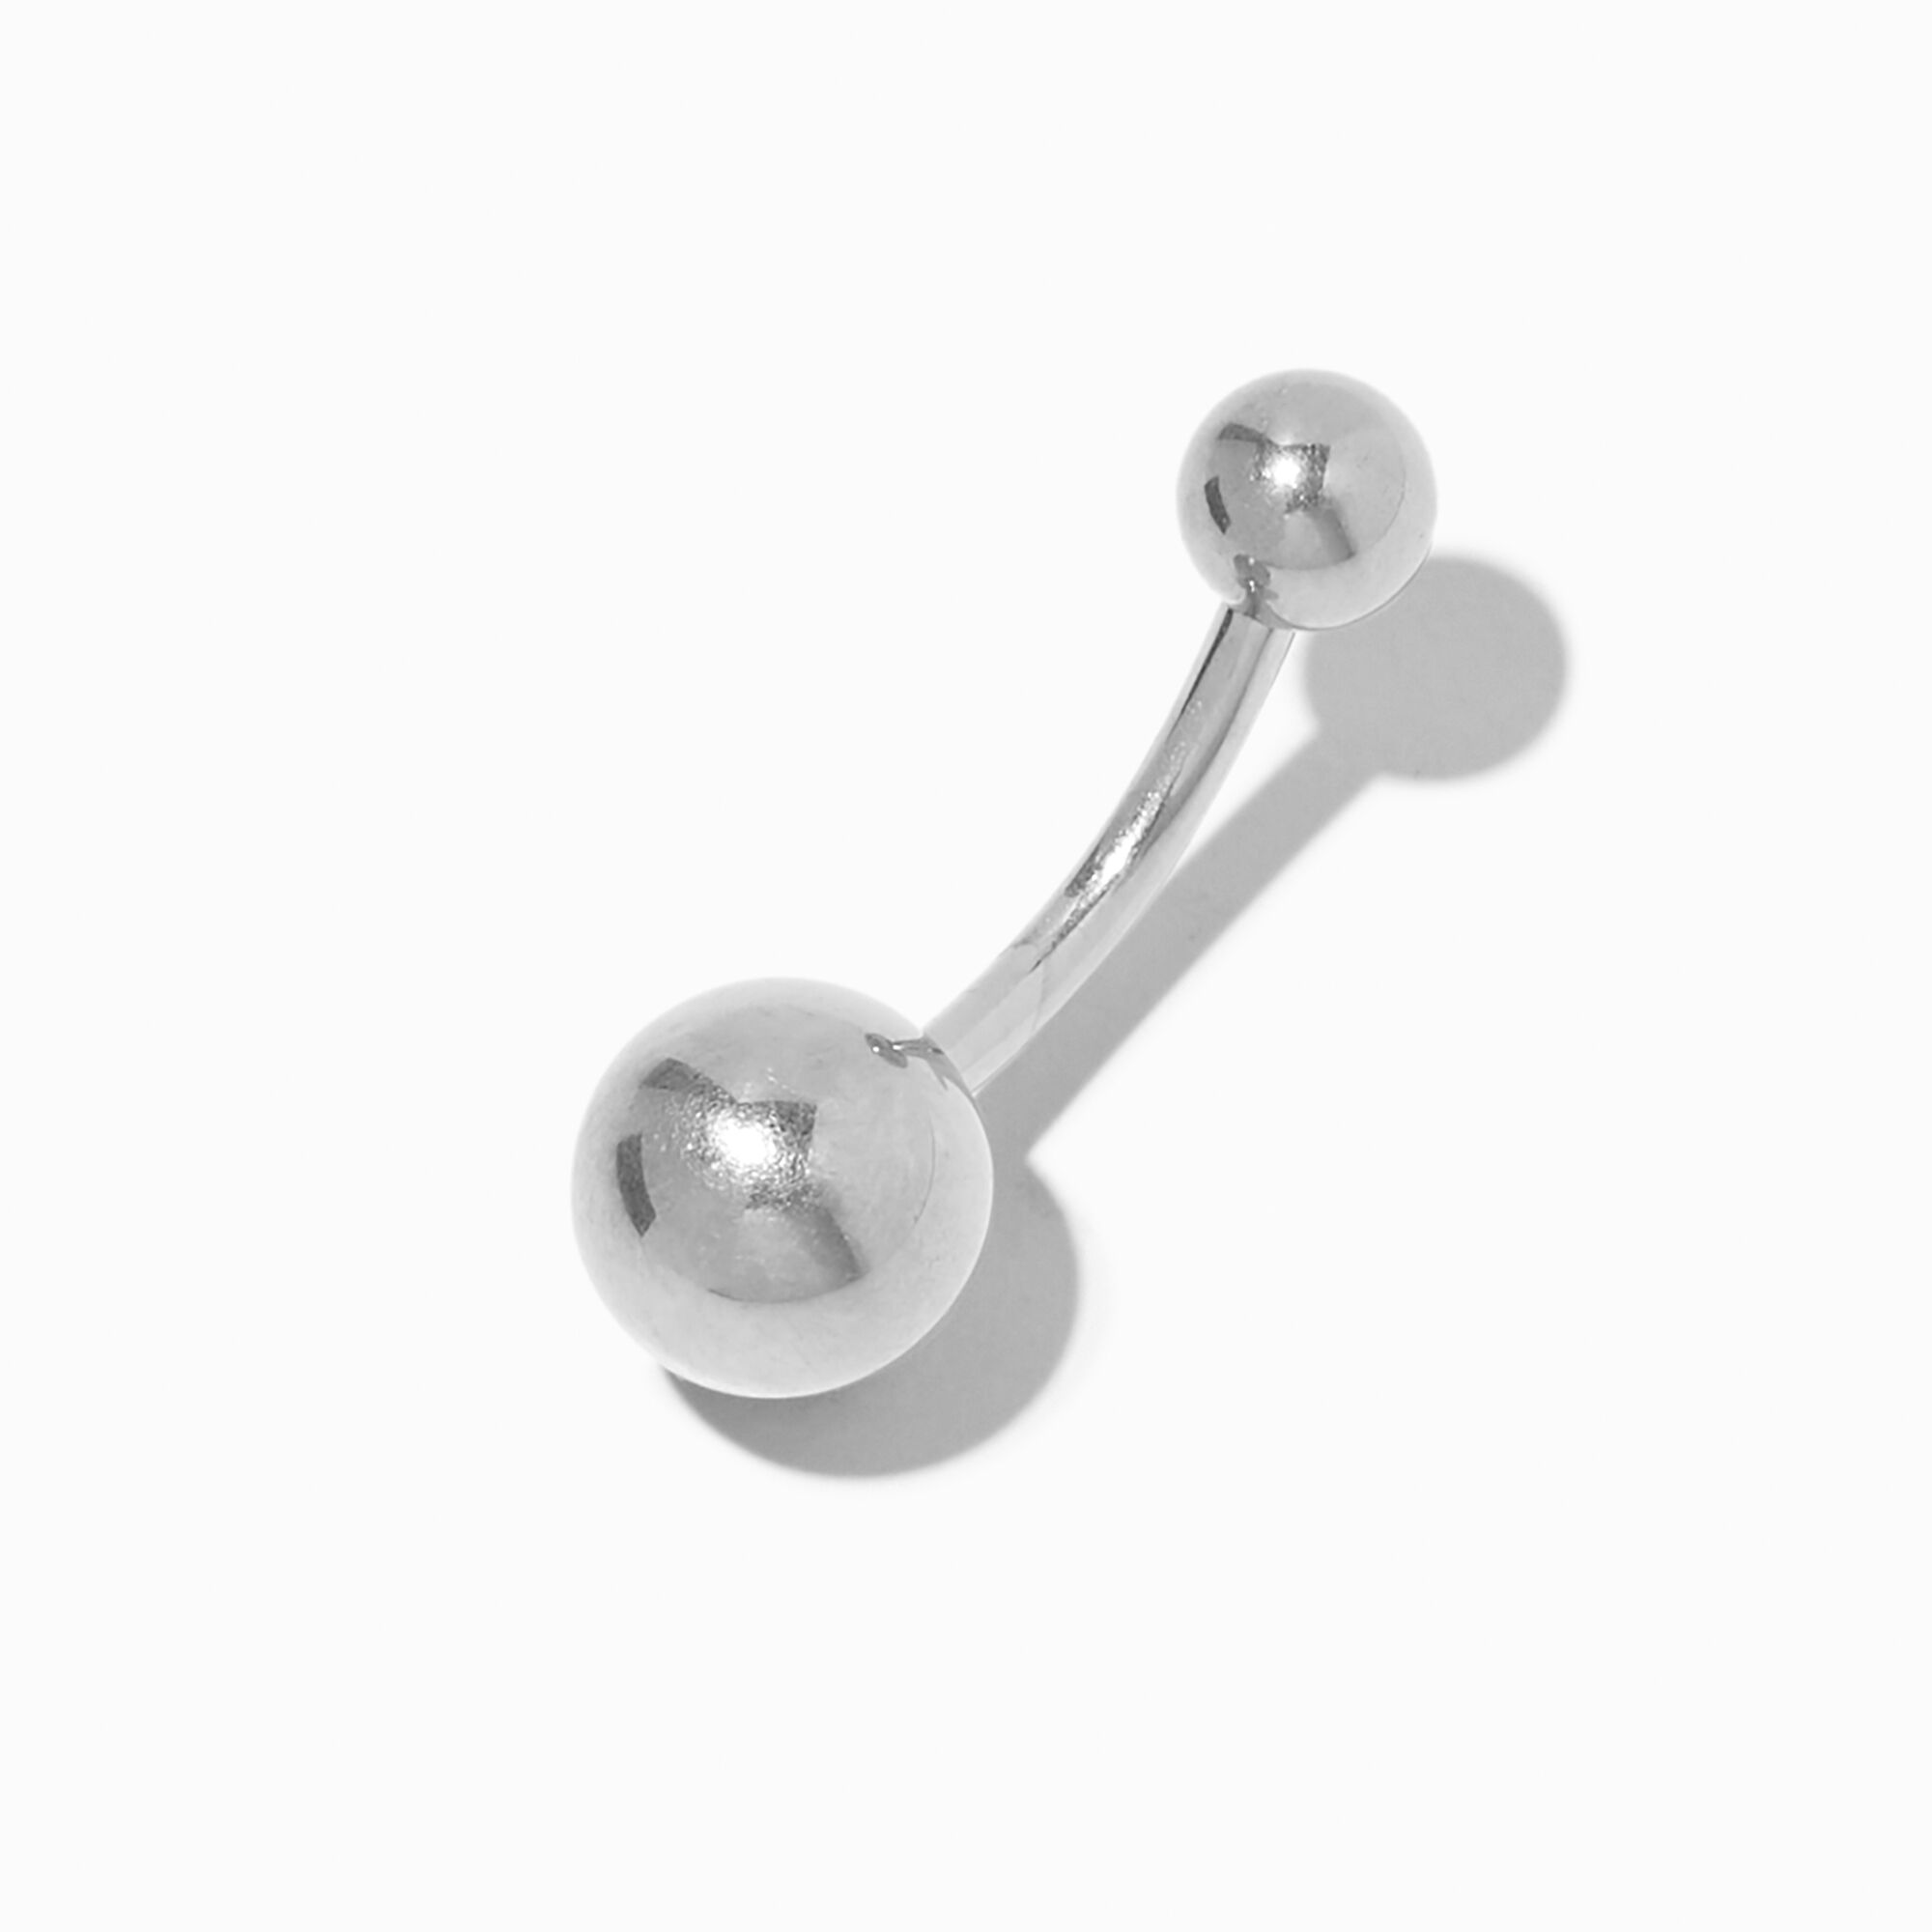 View Claires Titanium 14G Ball Belly Ring Silver information